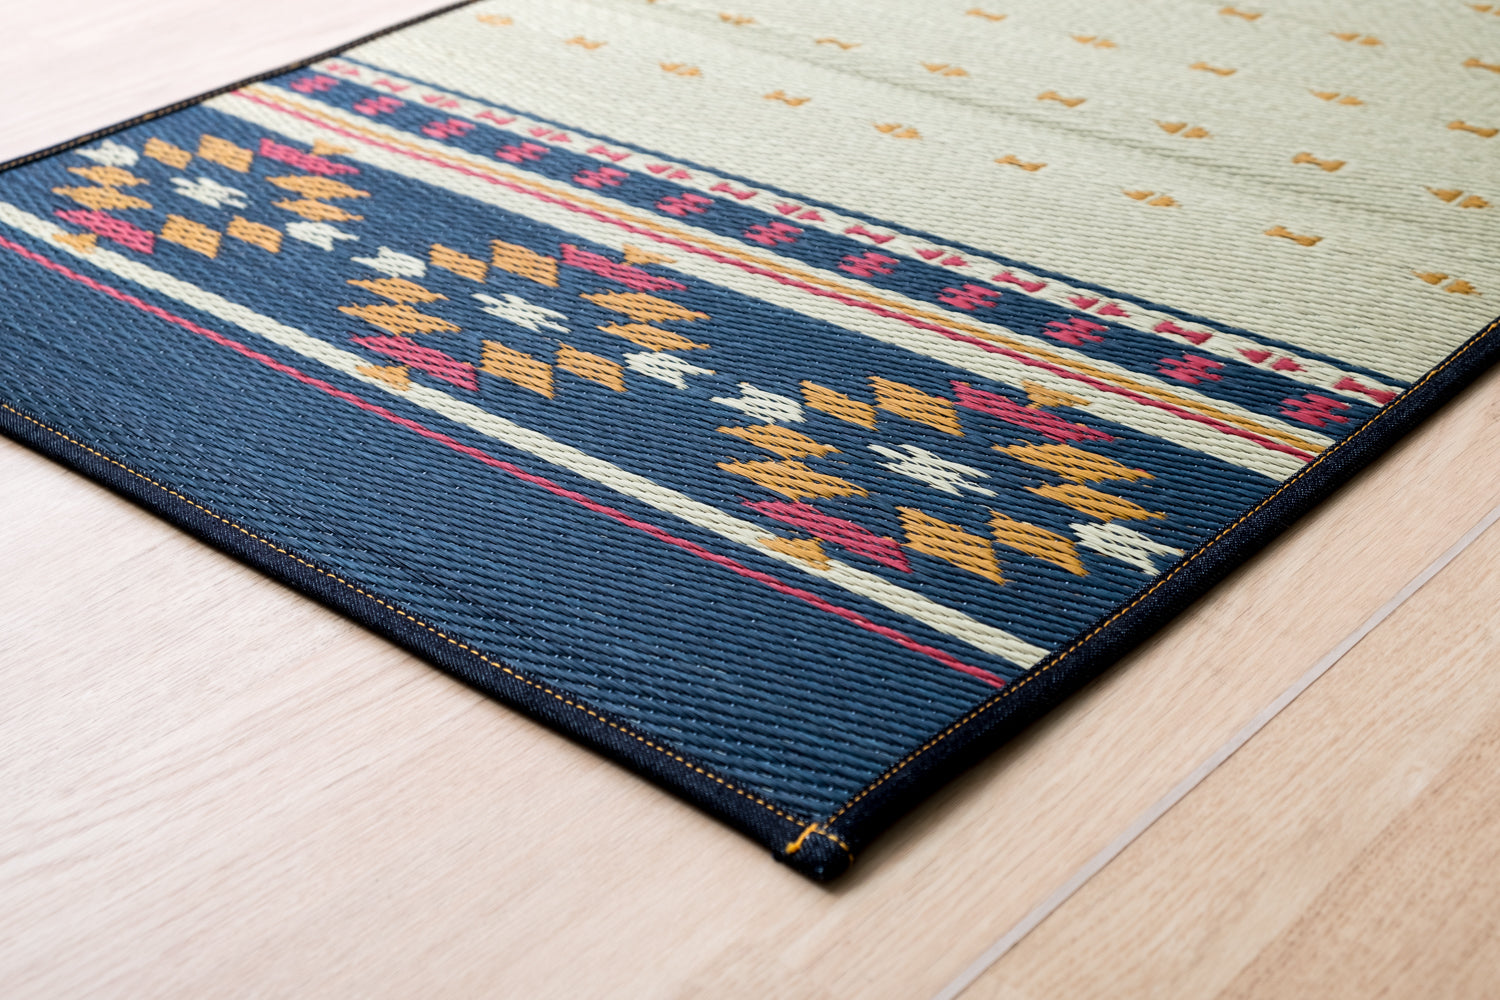 Introducing The Tatami Yoga Mat. Learn about the company that is turning…, by Ellen F